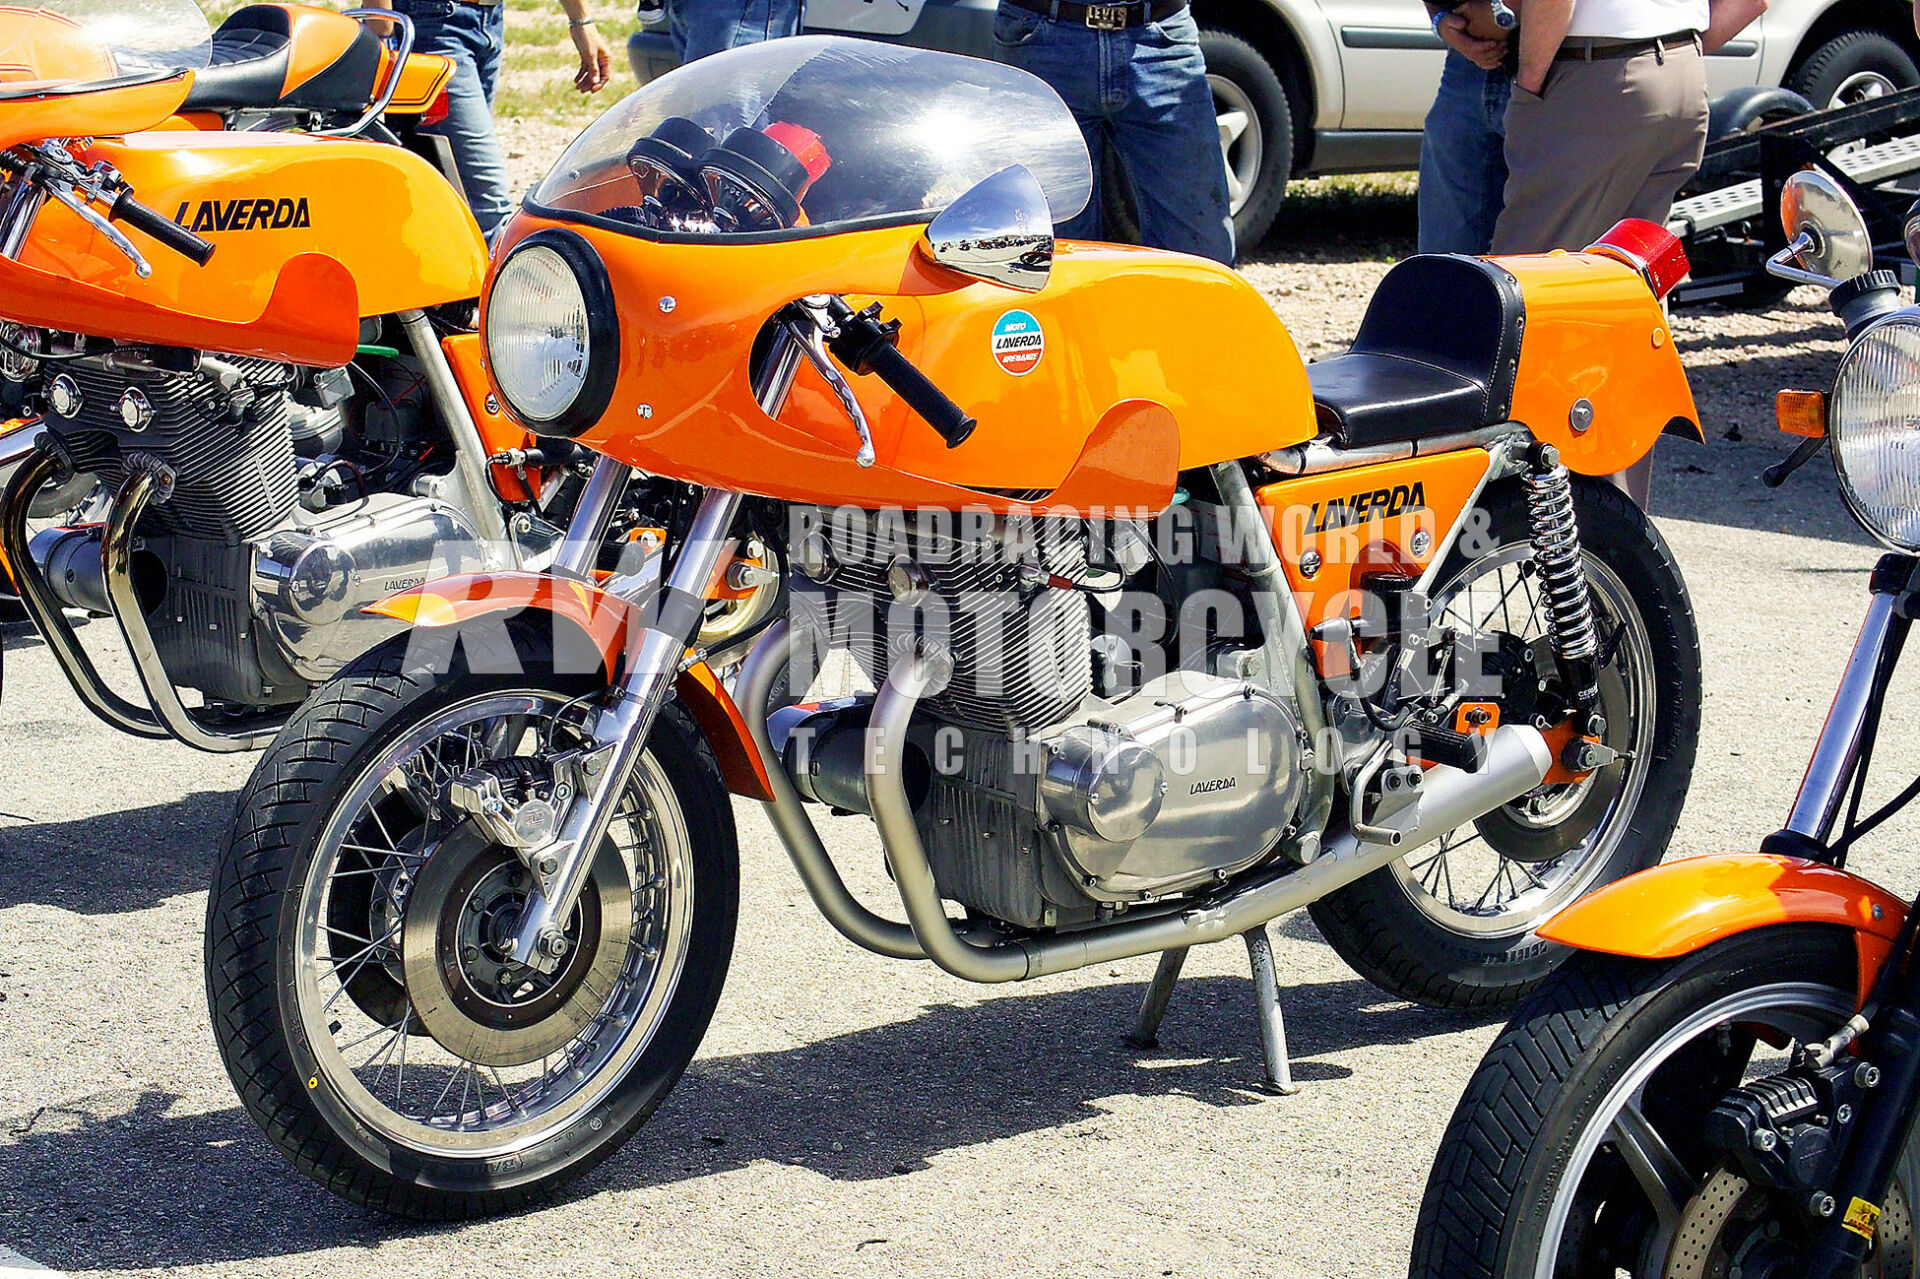 A late-model 1974 Laverda 750SFC (Super Freni Competizione) with a customer-installed speedometer, tachometer, and mirrors. Disc brakes were now stock as were wire-spoke wheels with Borrani rims. Photo by Mick Ofield.